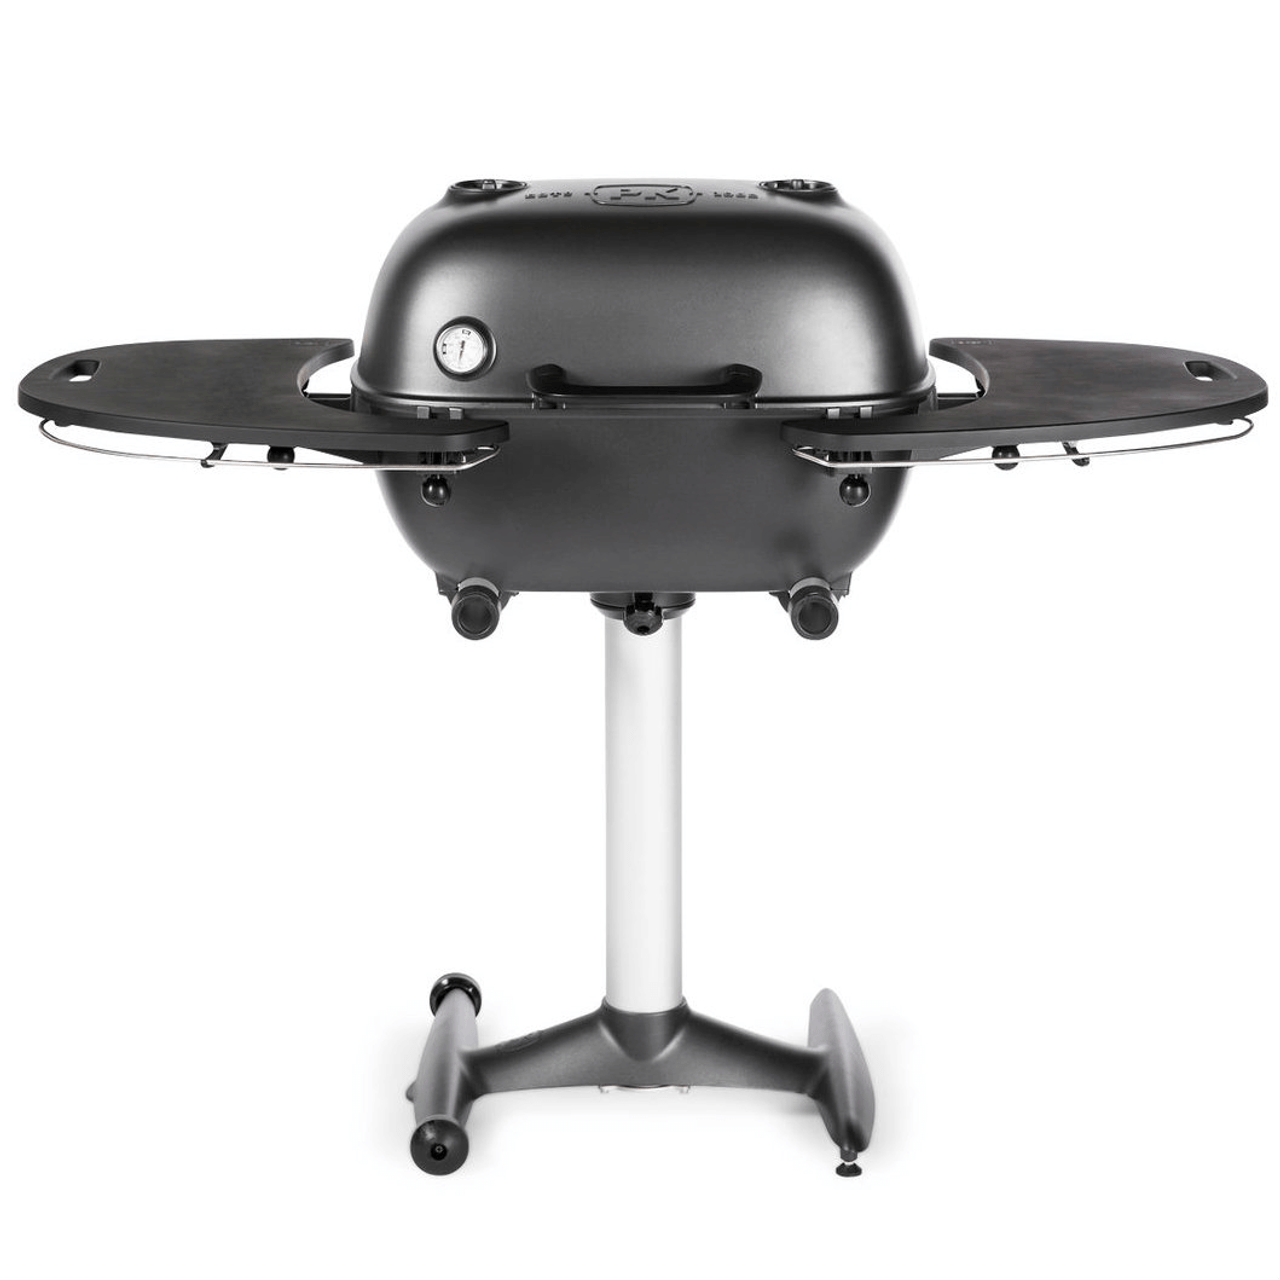 PK360 Grill and Smoker - Graphite